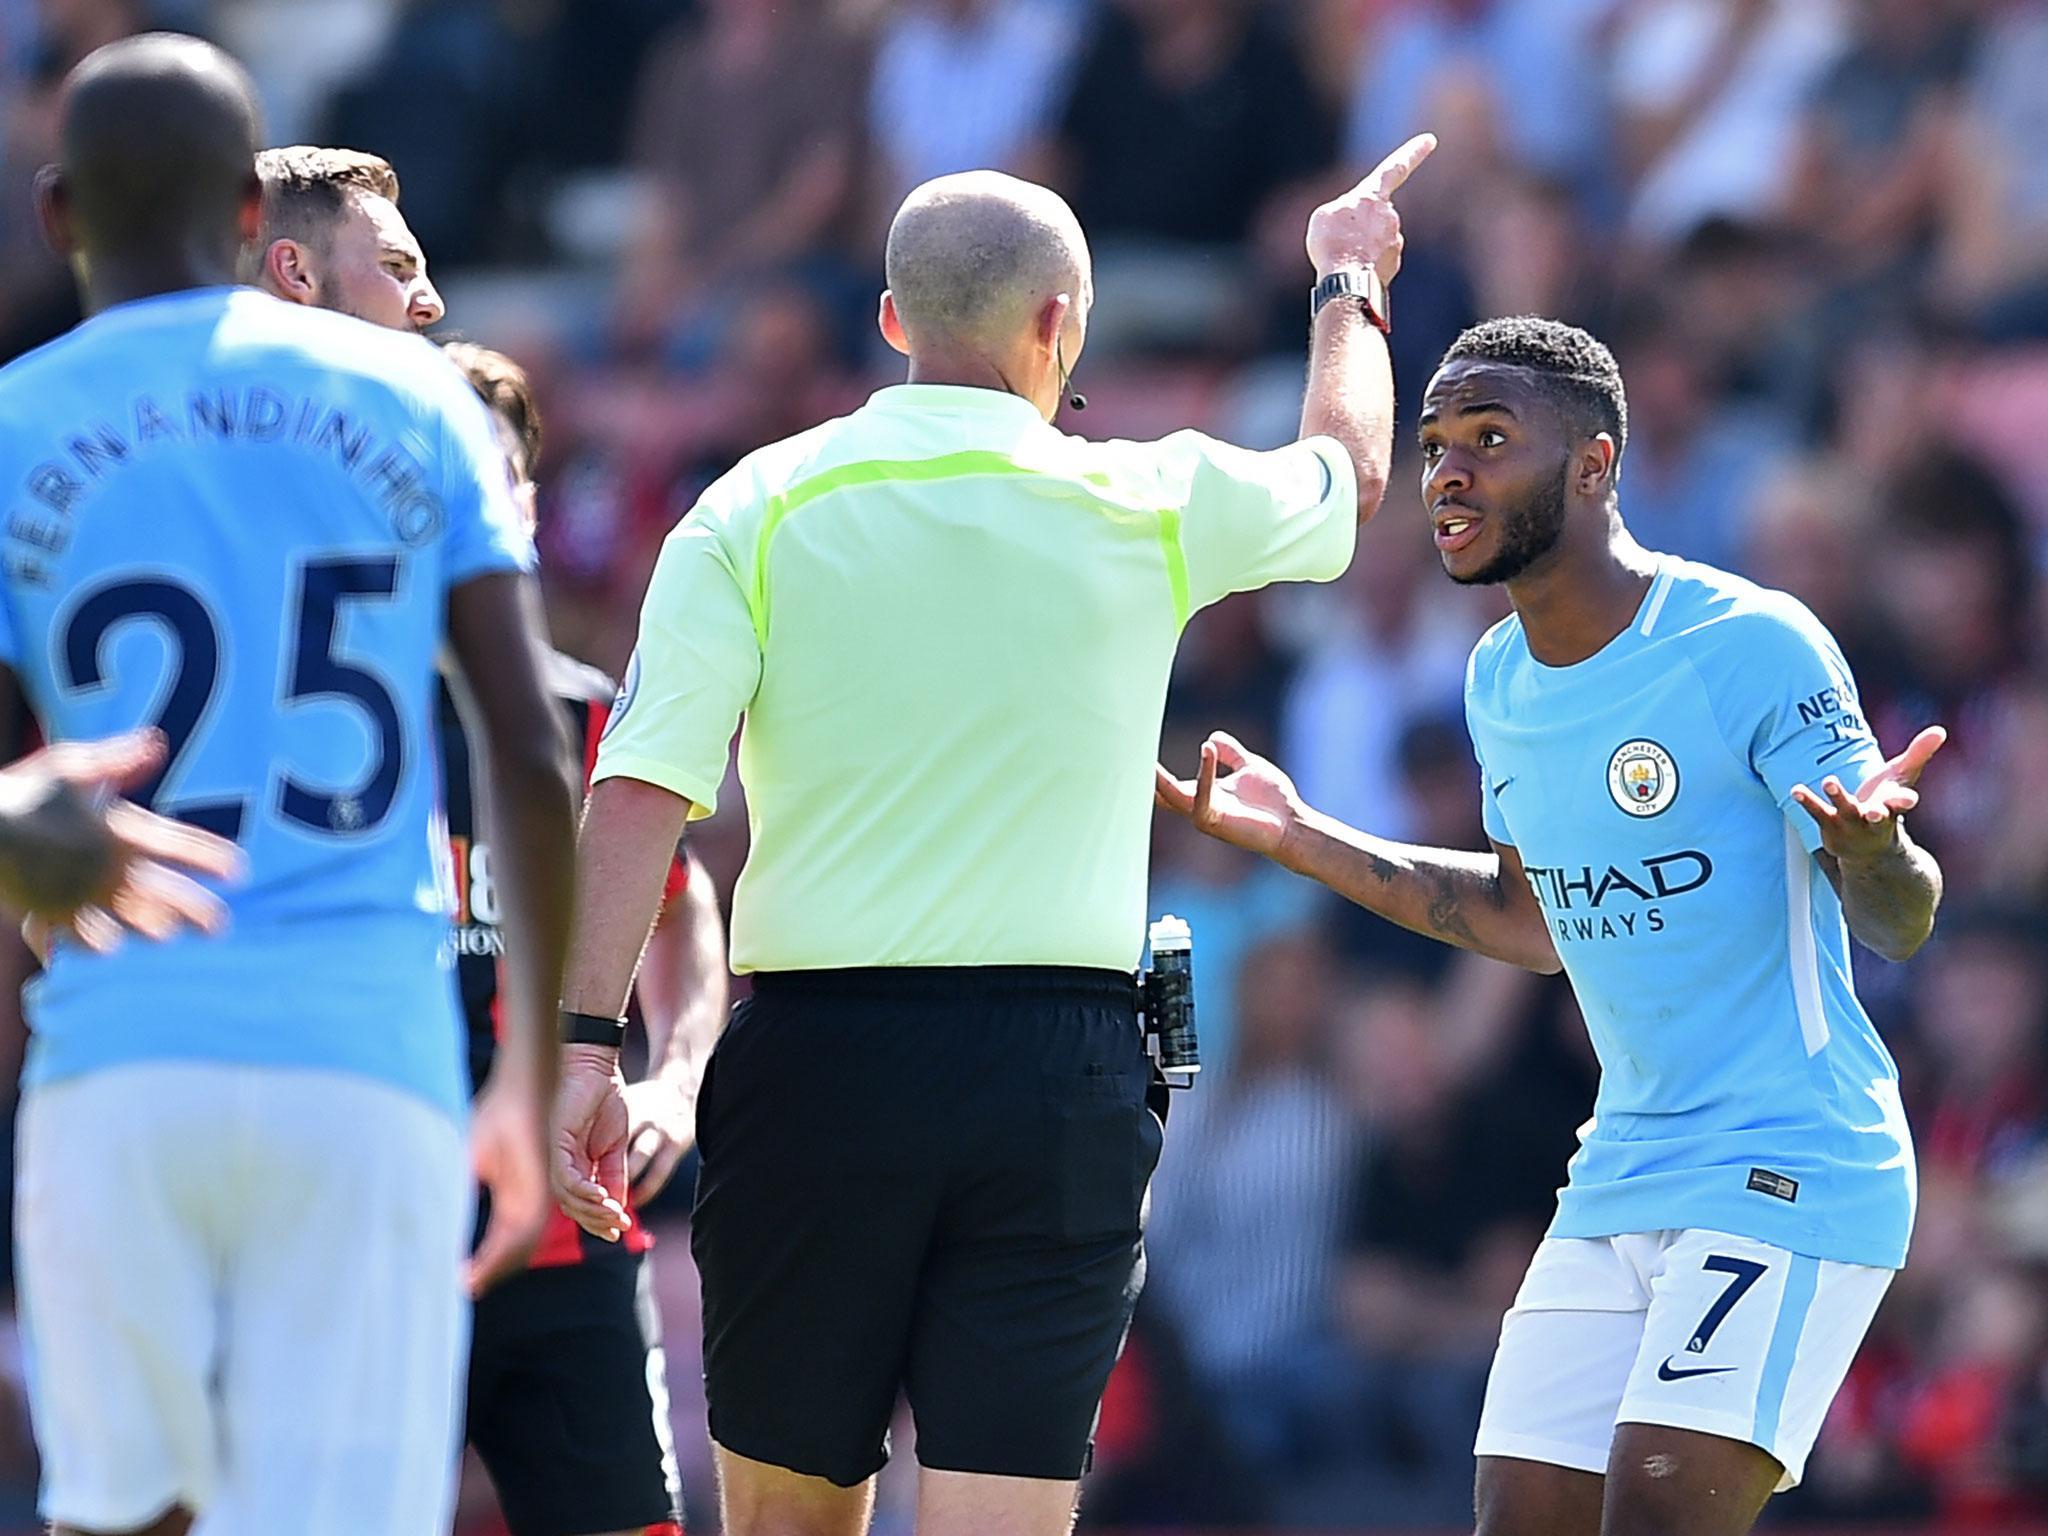 Raheem Sterling scored the winner before being shown a second yellow card